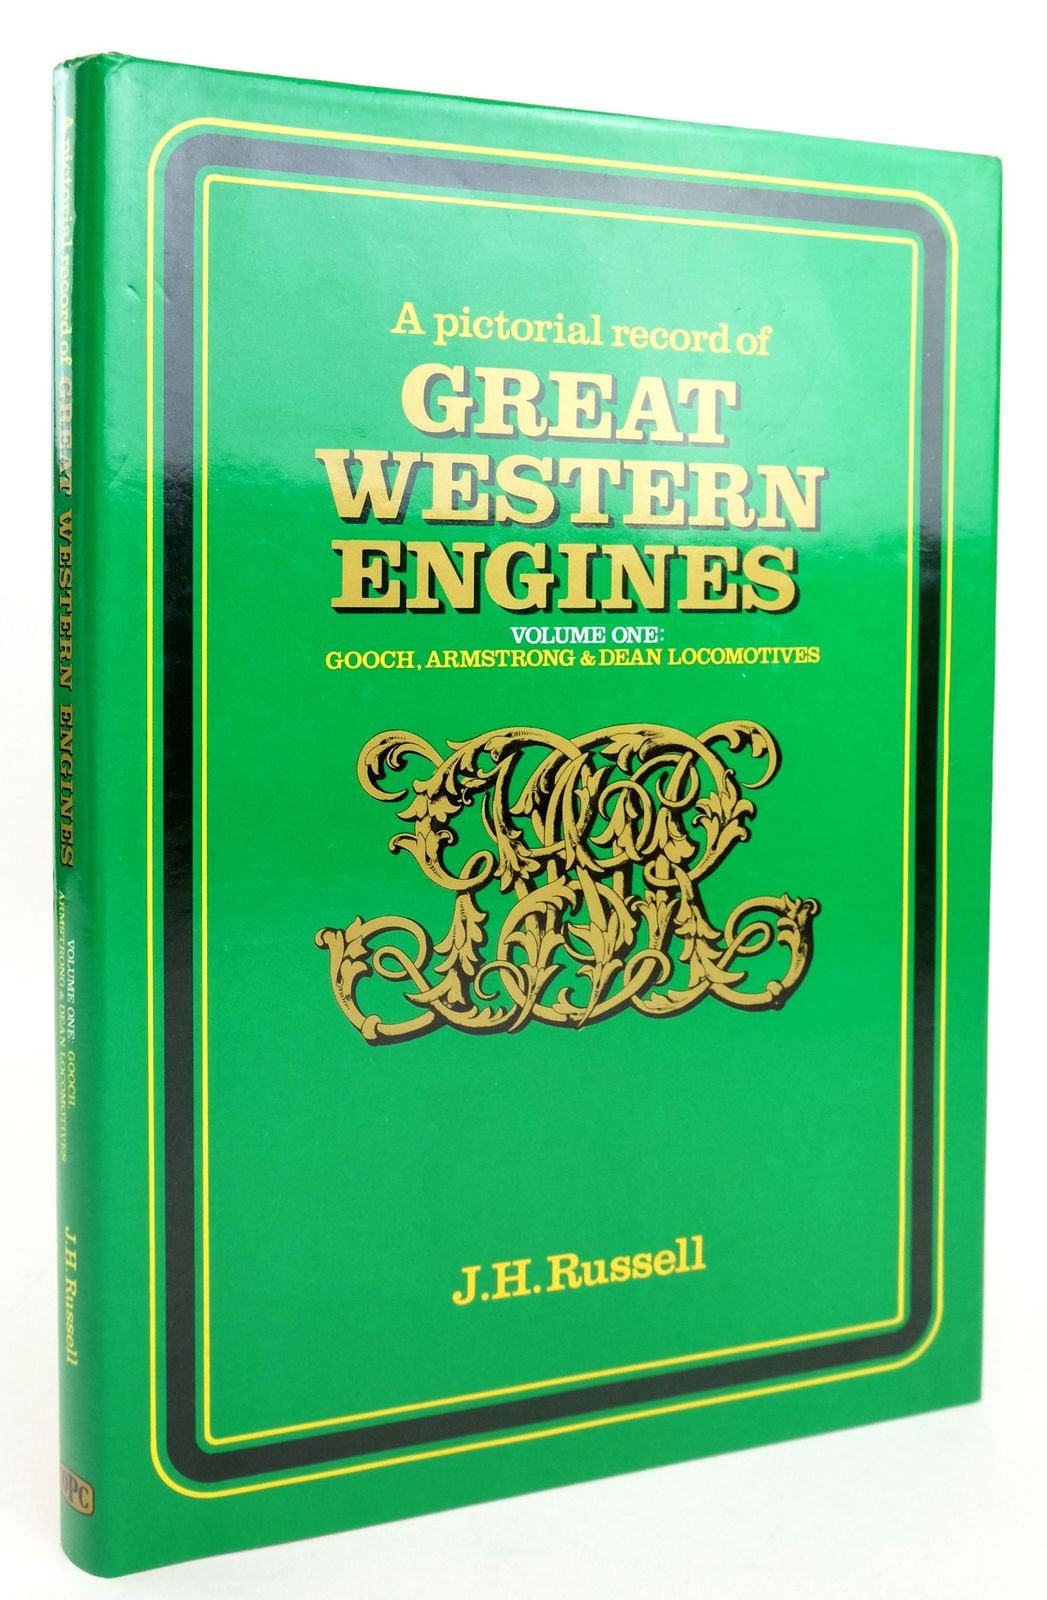 Photo of A PICTORIAL RECORD OF GREAT WESTERN ENGINES VOLUME ONE written by Russell, J.H. published by Oxford Publishing (STOCK CODE: 1820192)  for sale by Stella & Rose's Books